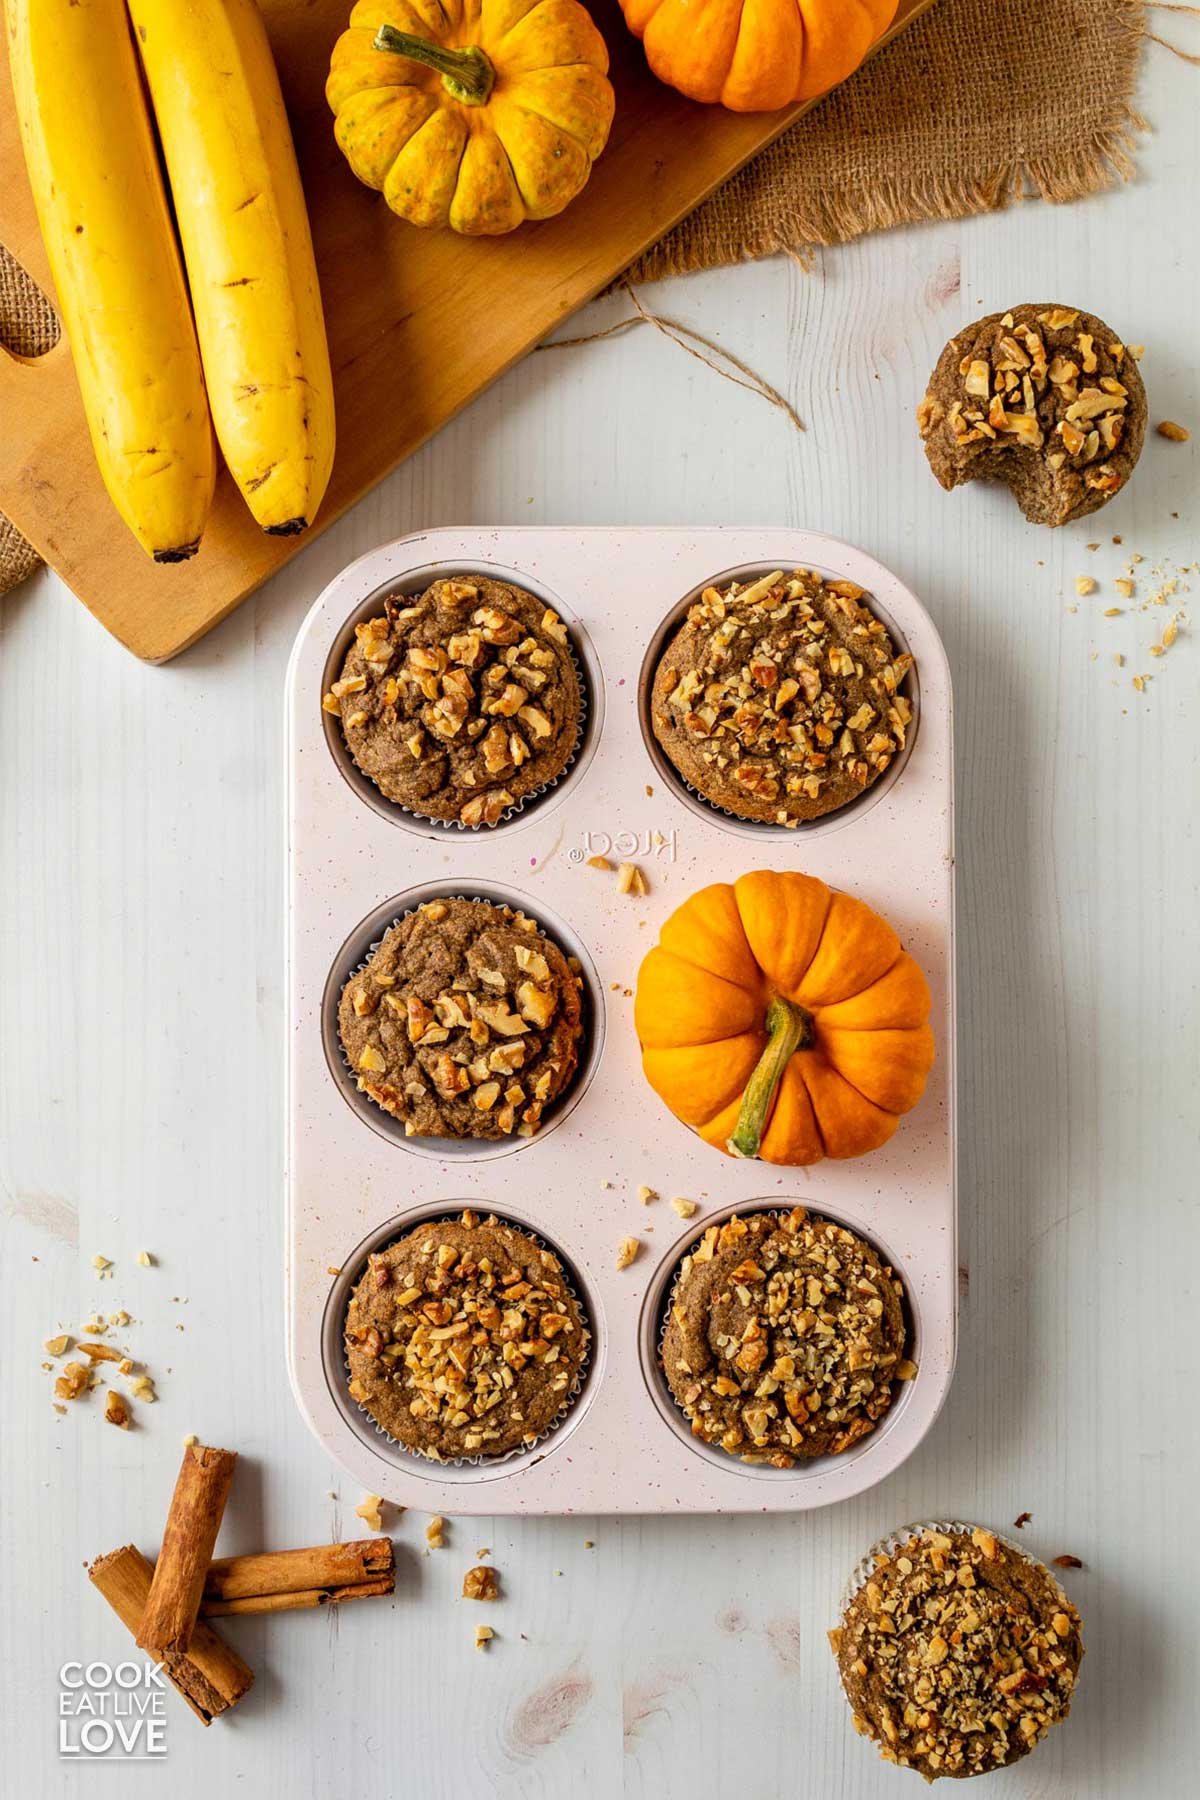 Fresh baked eggless pumpkin muffins in a muffin pan with a small pumpkin in one of the muffin openings.